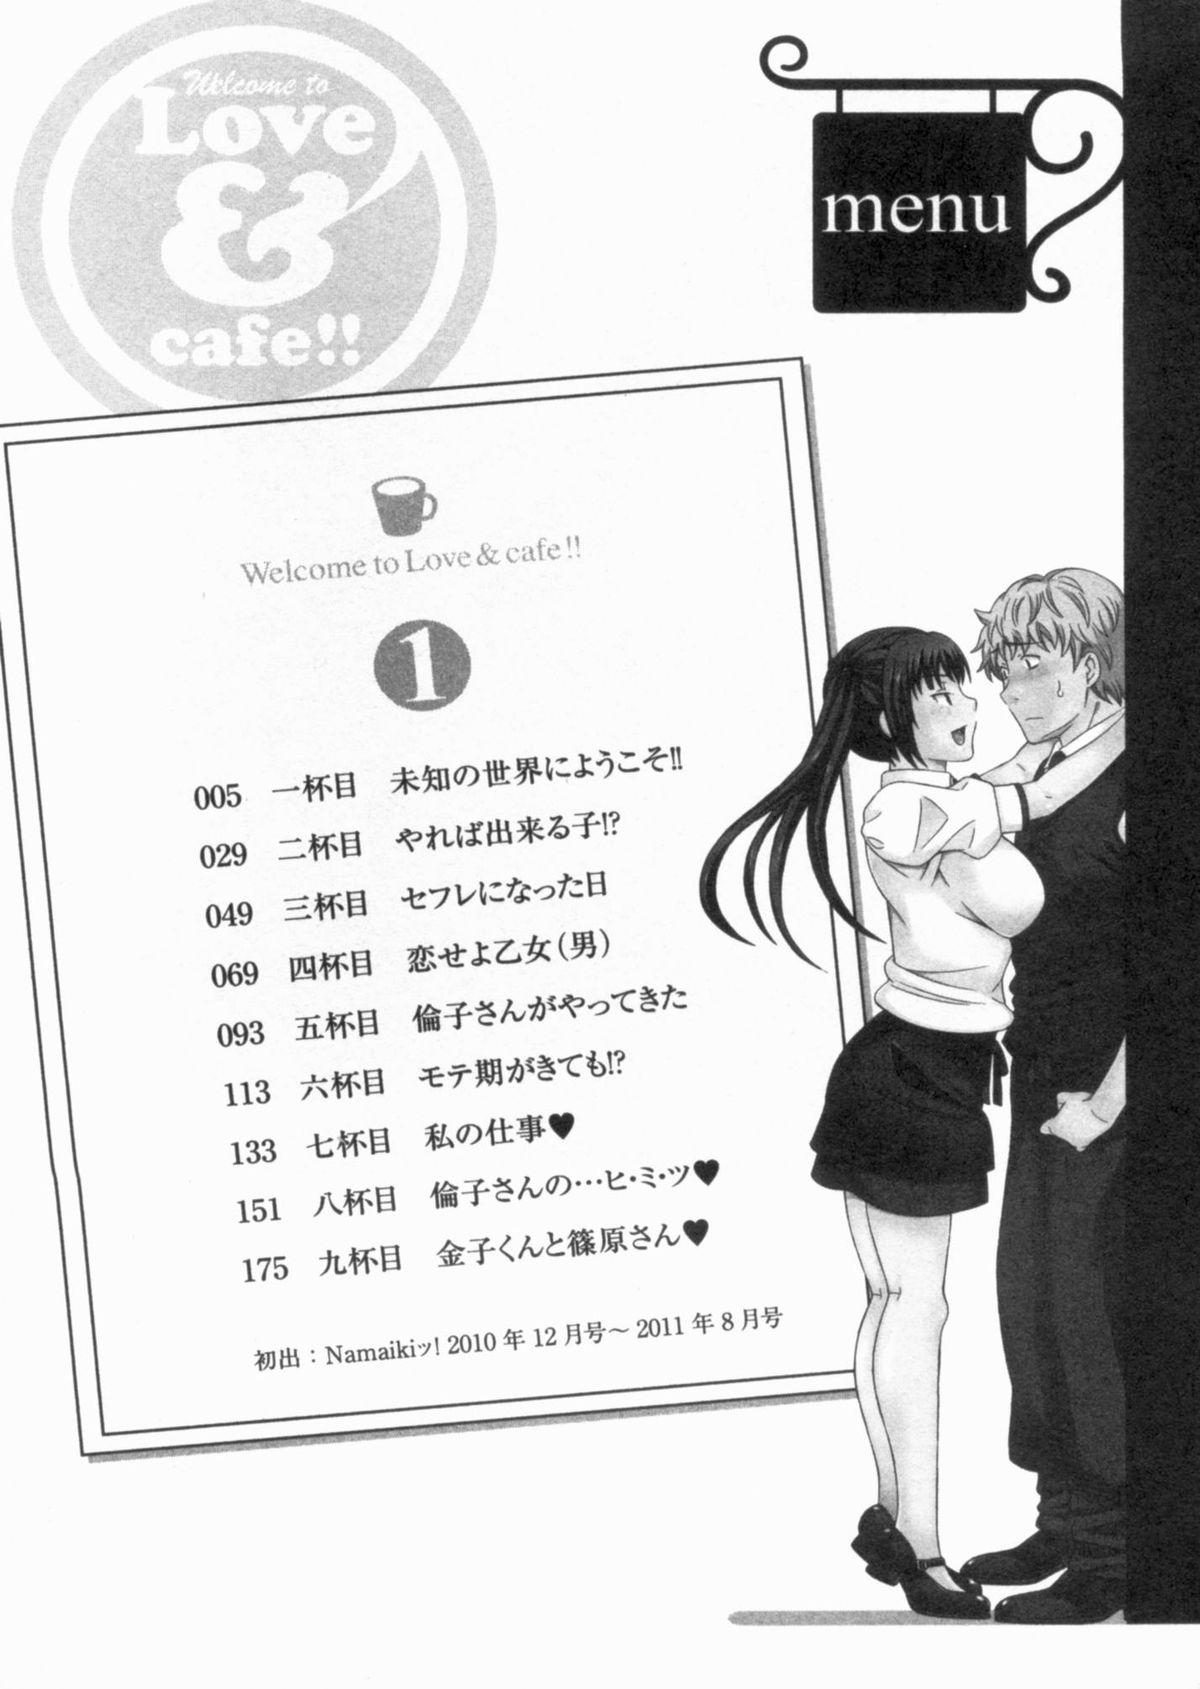 Booty Koi Cafe ni Youkoso!! 1 - Welcome to Love&cafe!! 1 Rubbing - Page 6